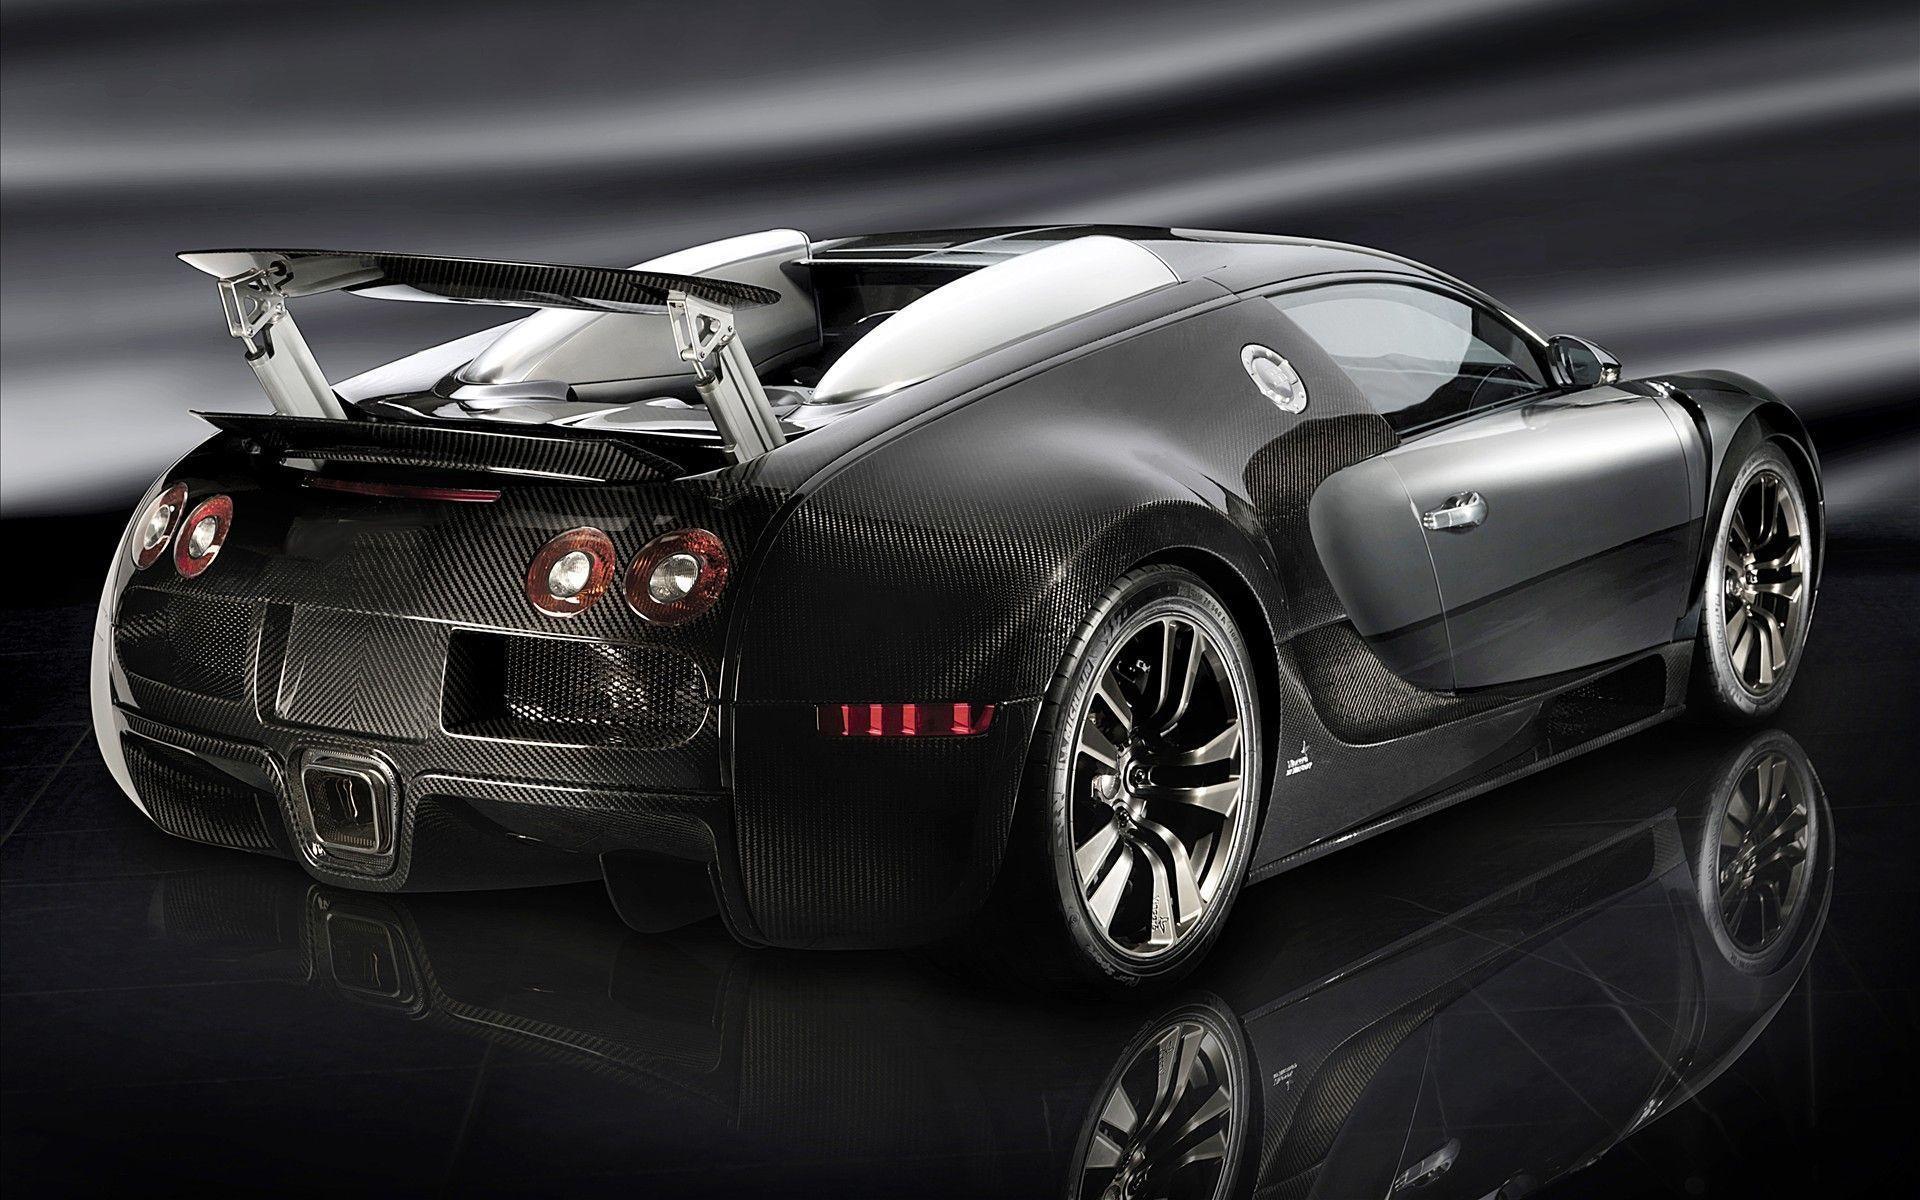 Bugatti HD Wallpaper for Desktop, iPhone, iPad, and Android